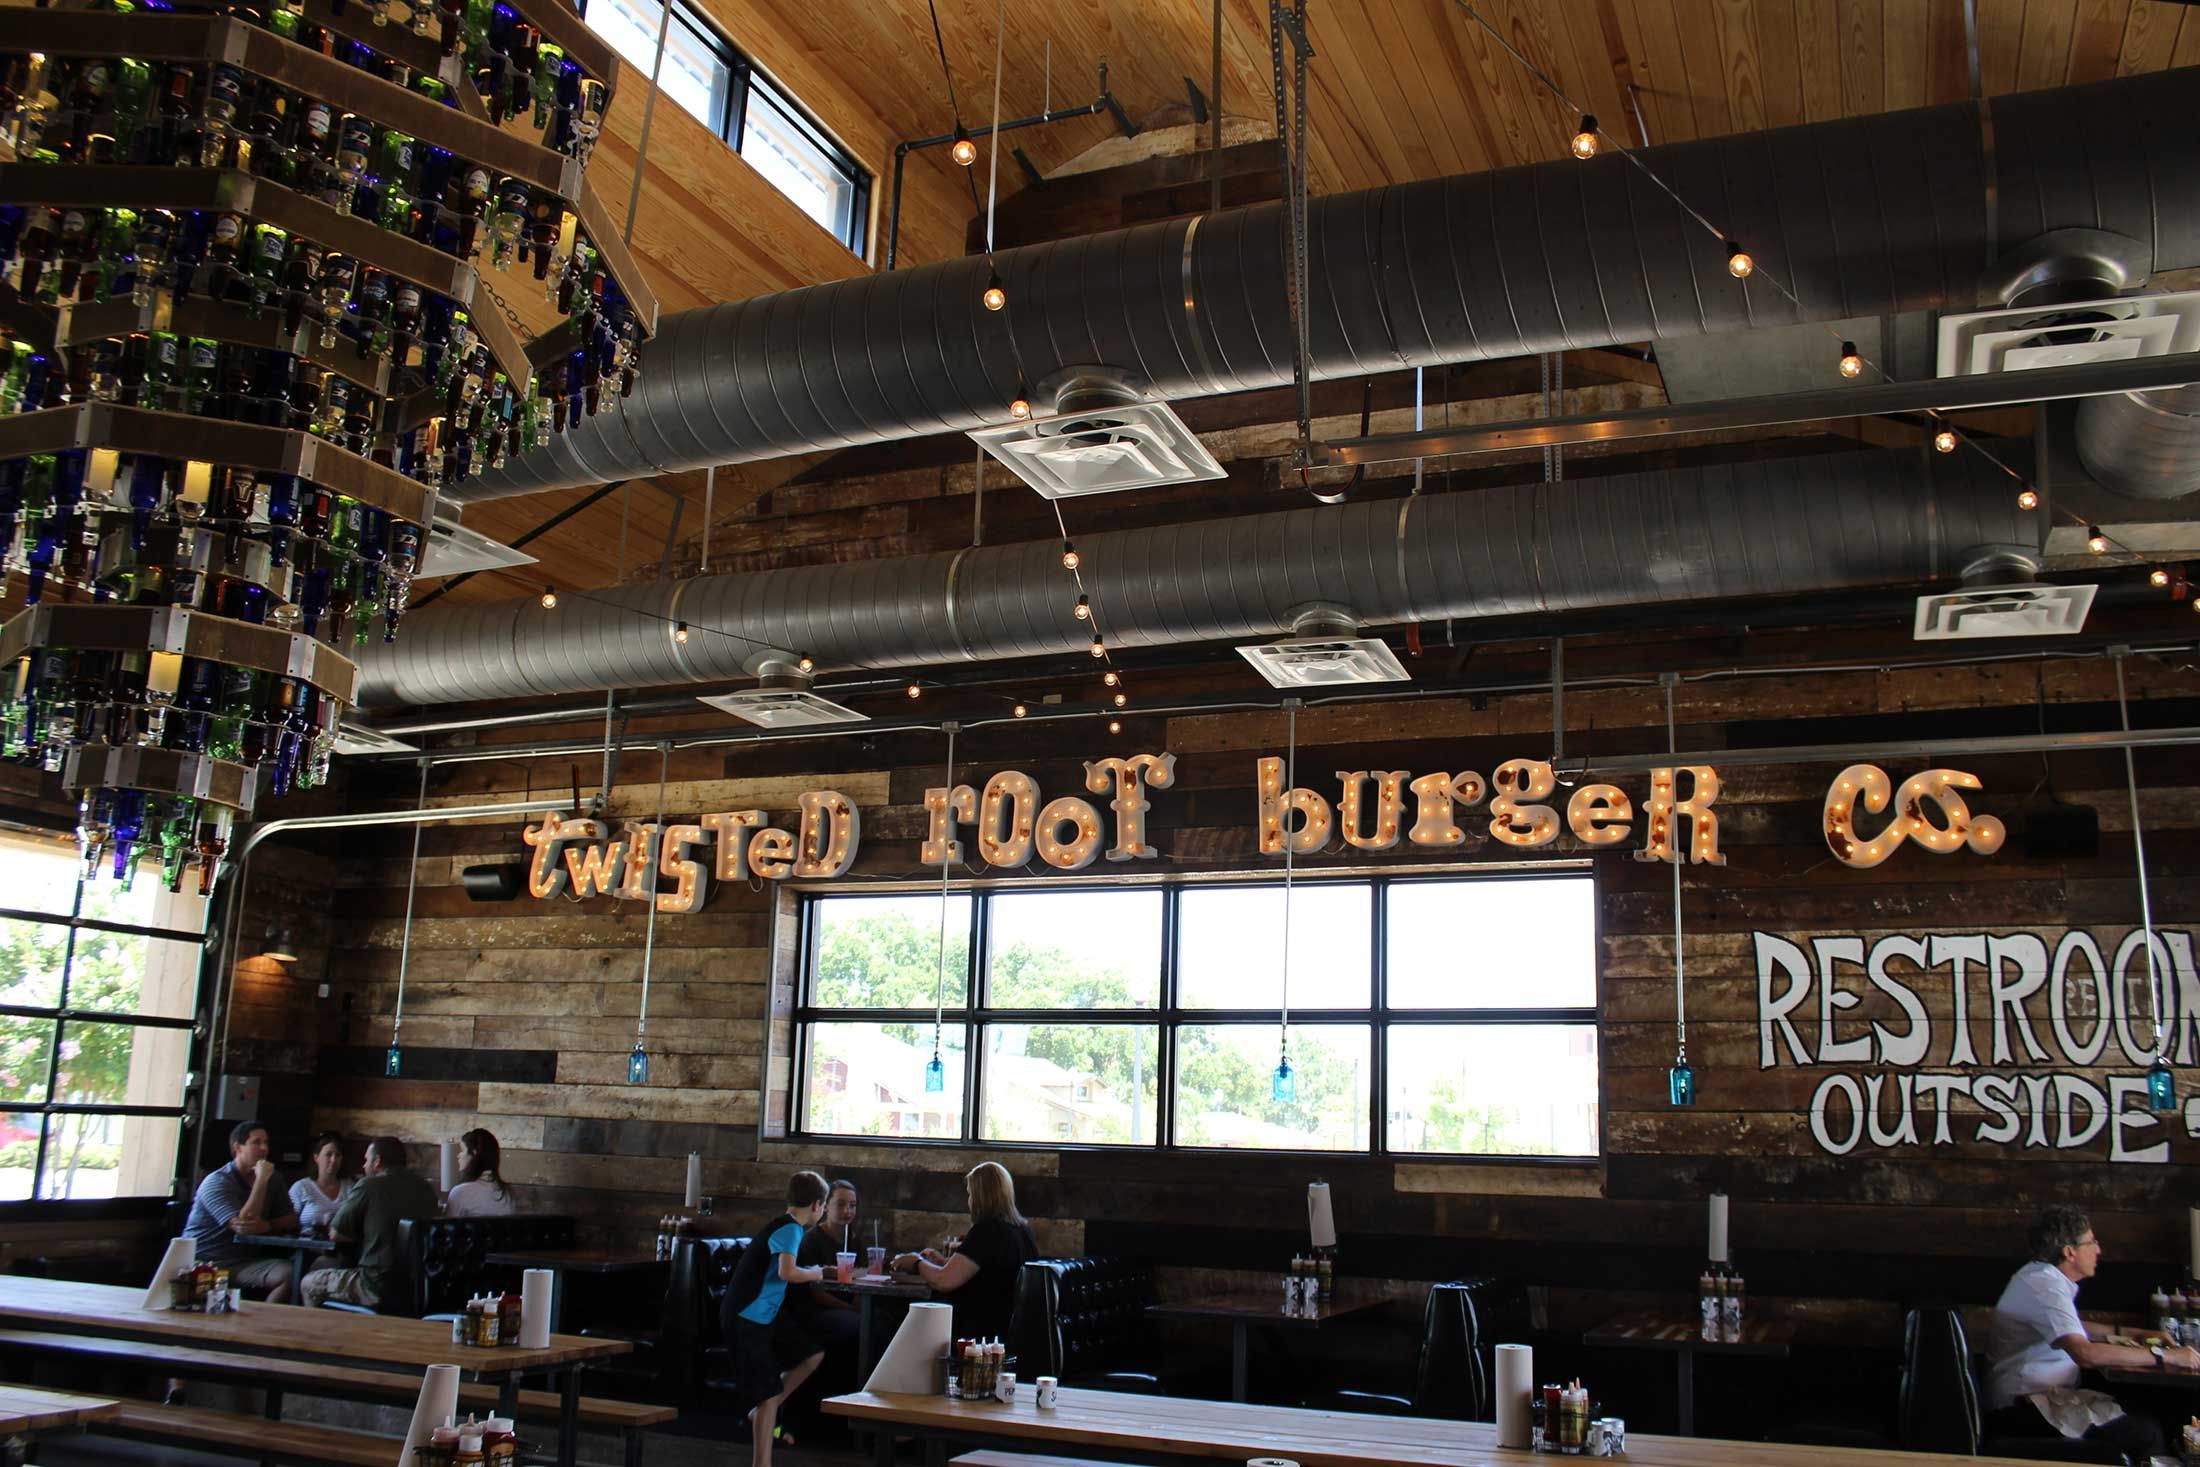 The interior of a restaurant with an exposed ceiling, walls lined with rough wood, and an all lower caps sign reading “twisted root burger co.”